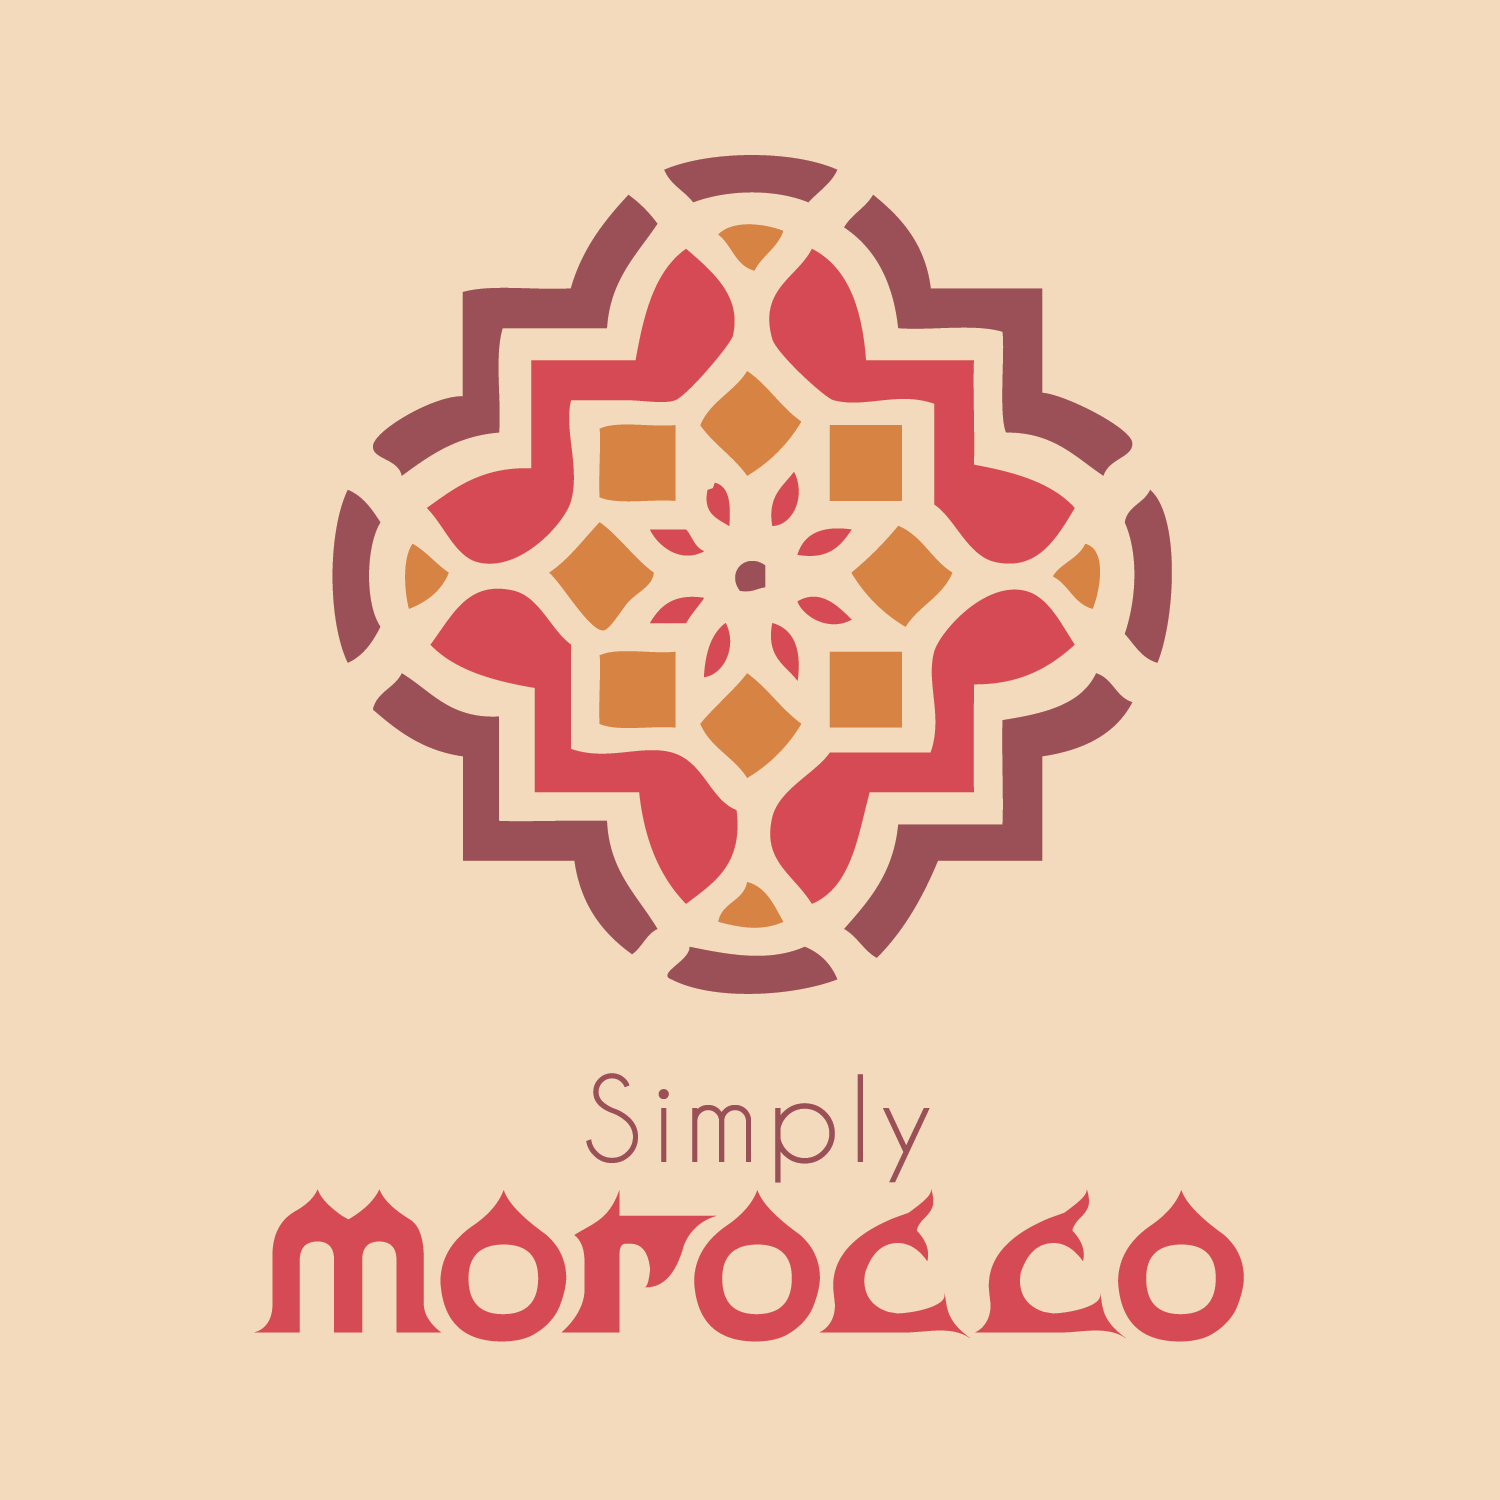 Moroccan Logo - nice #logo idea and #color scheme, needs refinement | Pattern ...